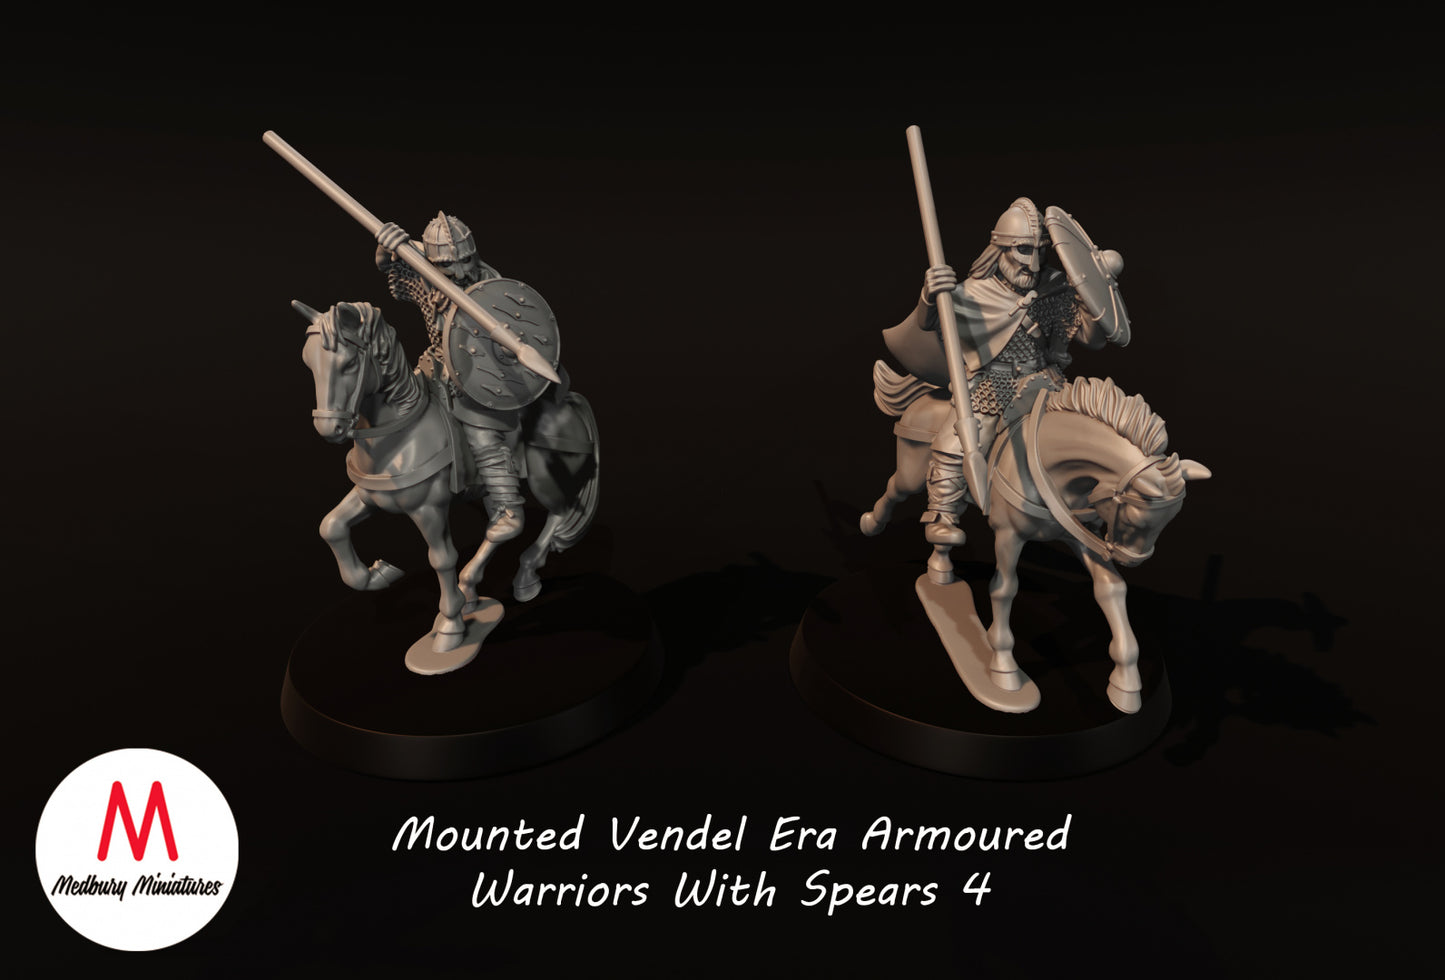 Mounted Vendel Era Armored Warriors With Spears 4